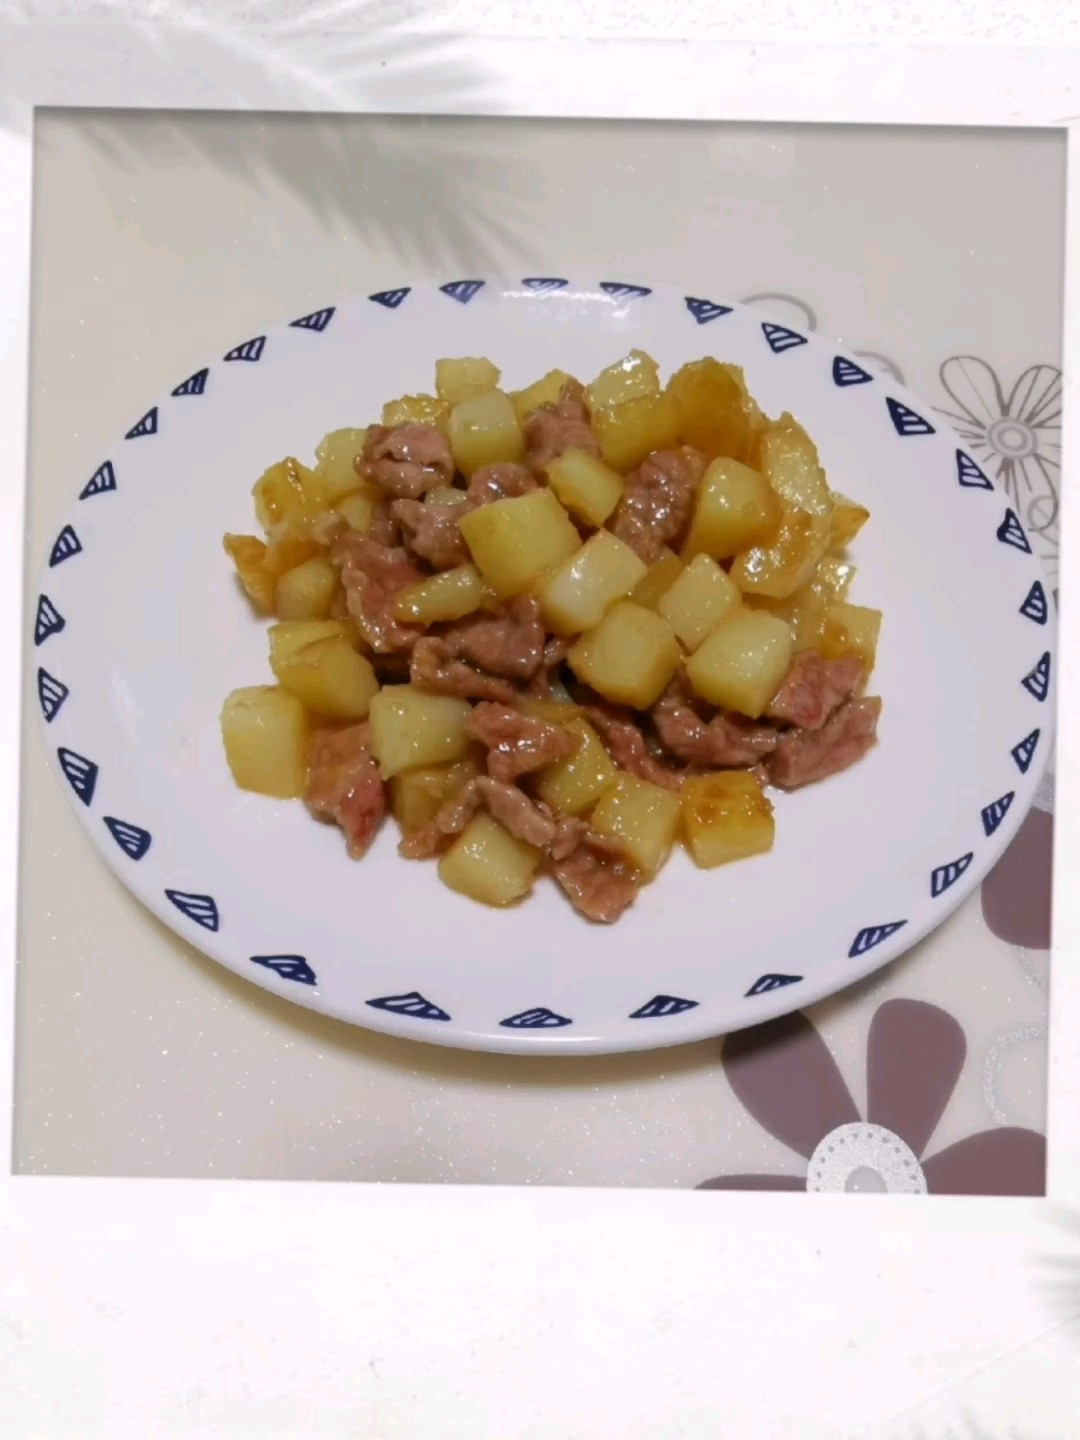 Stir-fried Beef with Potatoes